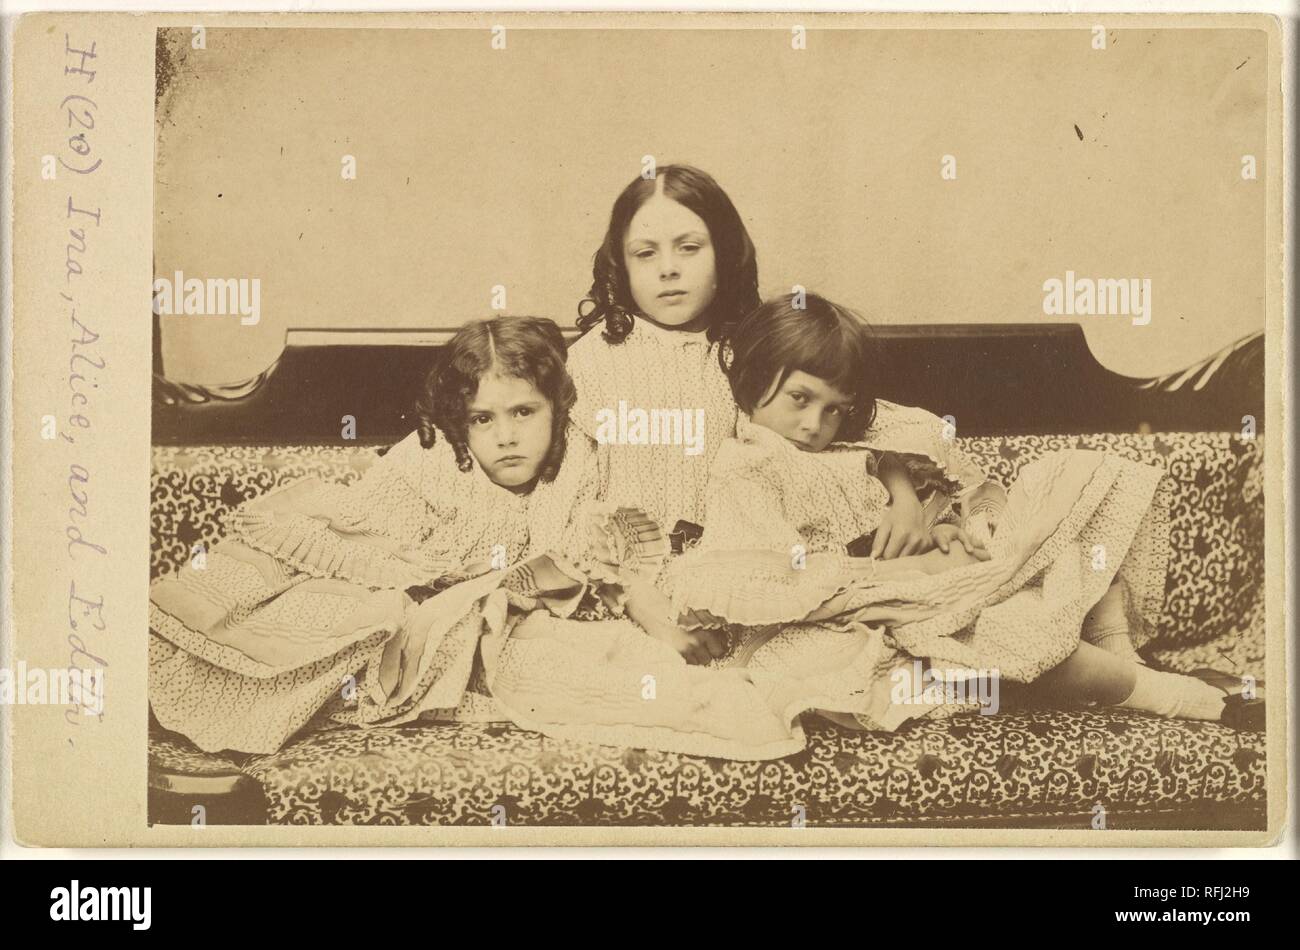 Edith, Ina and Alice Liddell on a Sofa. Artist: Lewis Carroll (British, Daresbury, Cheshire 1832-1898 Guildford). Dimensions: Mount: 4 3/16 in. × 6 7/16 in. (10.7 × 16.3 cm)  Image: 4 1/16 × 6 1/16 in. (10.3 × 15.4 cm). Person in Photograph: Person in photograph Alice Pleasance Liddell (British, 1852-1934); Person in photograph Edith Mary Liddell (British, 1854-1876); Person in photograph Ina Liddell (British, 1849-1930). Date: Summer 1858. Museum: Metropolitan Museum of Art, New York, USA. Stock Photo